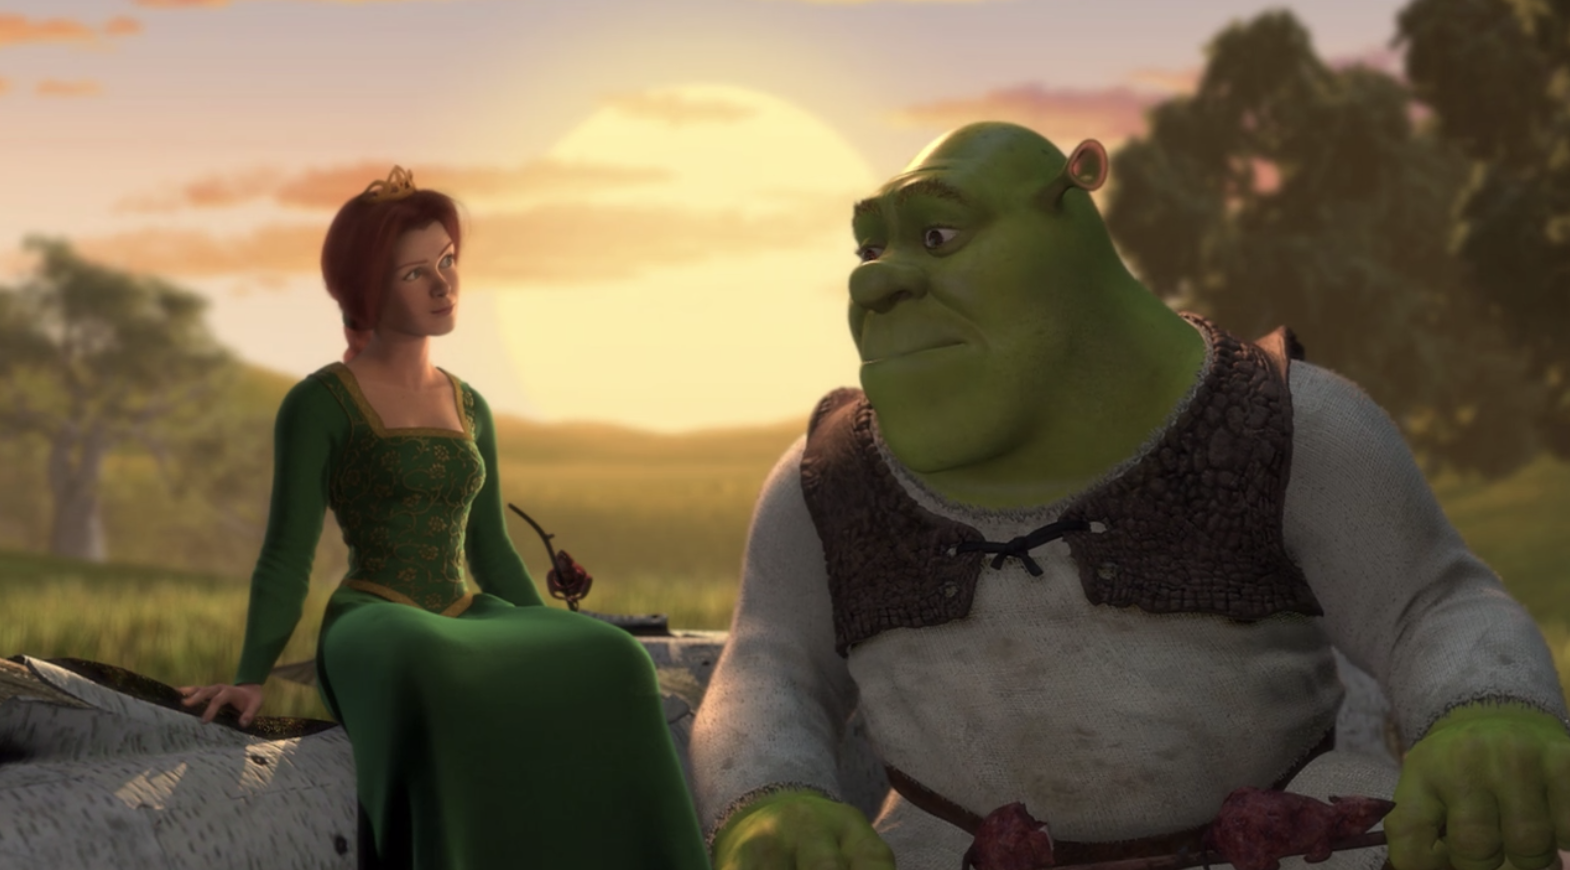 Shrek and Fiona talking next to each other 